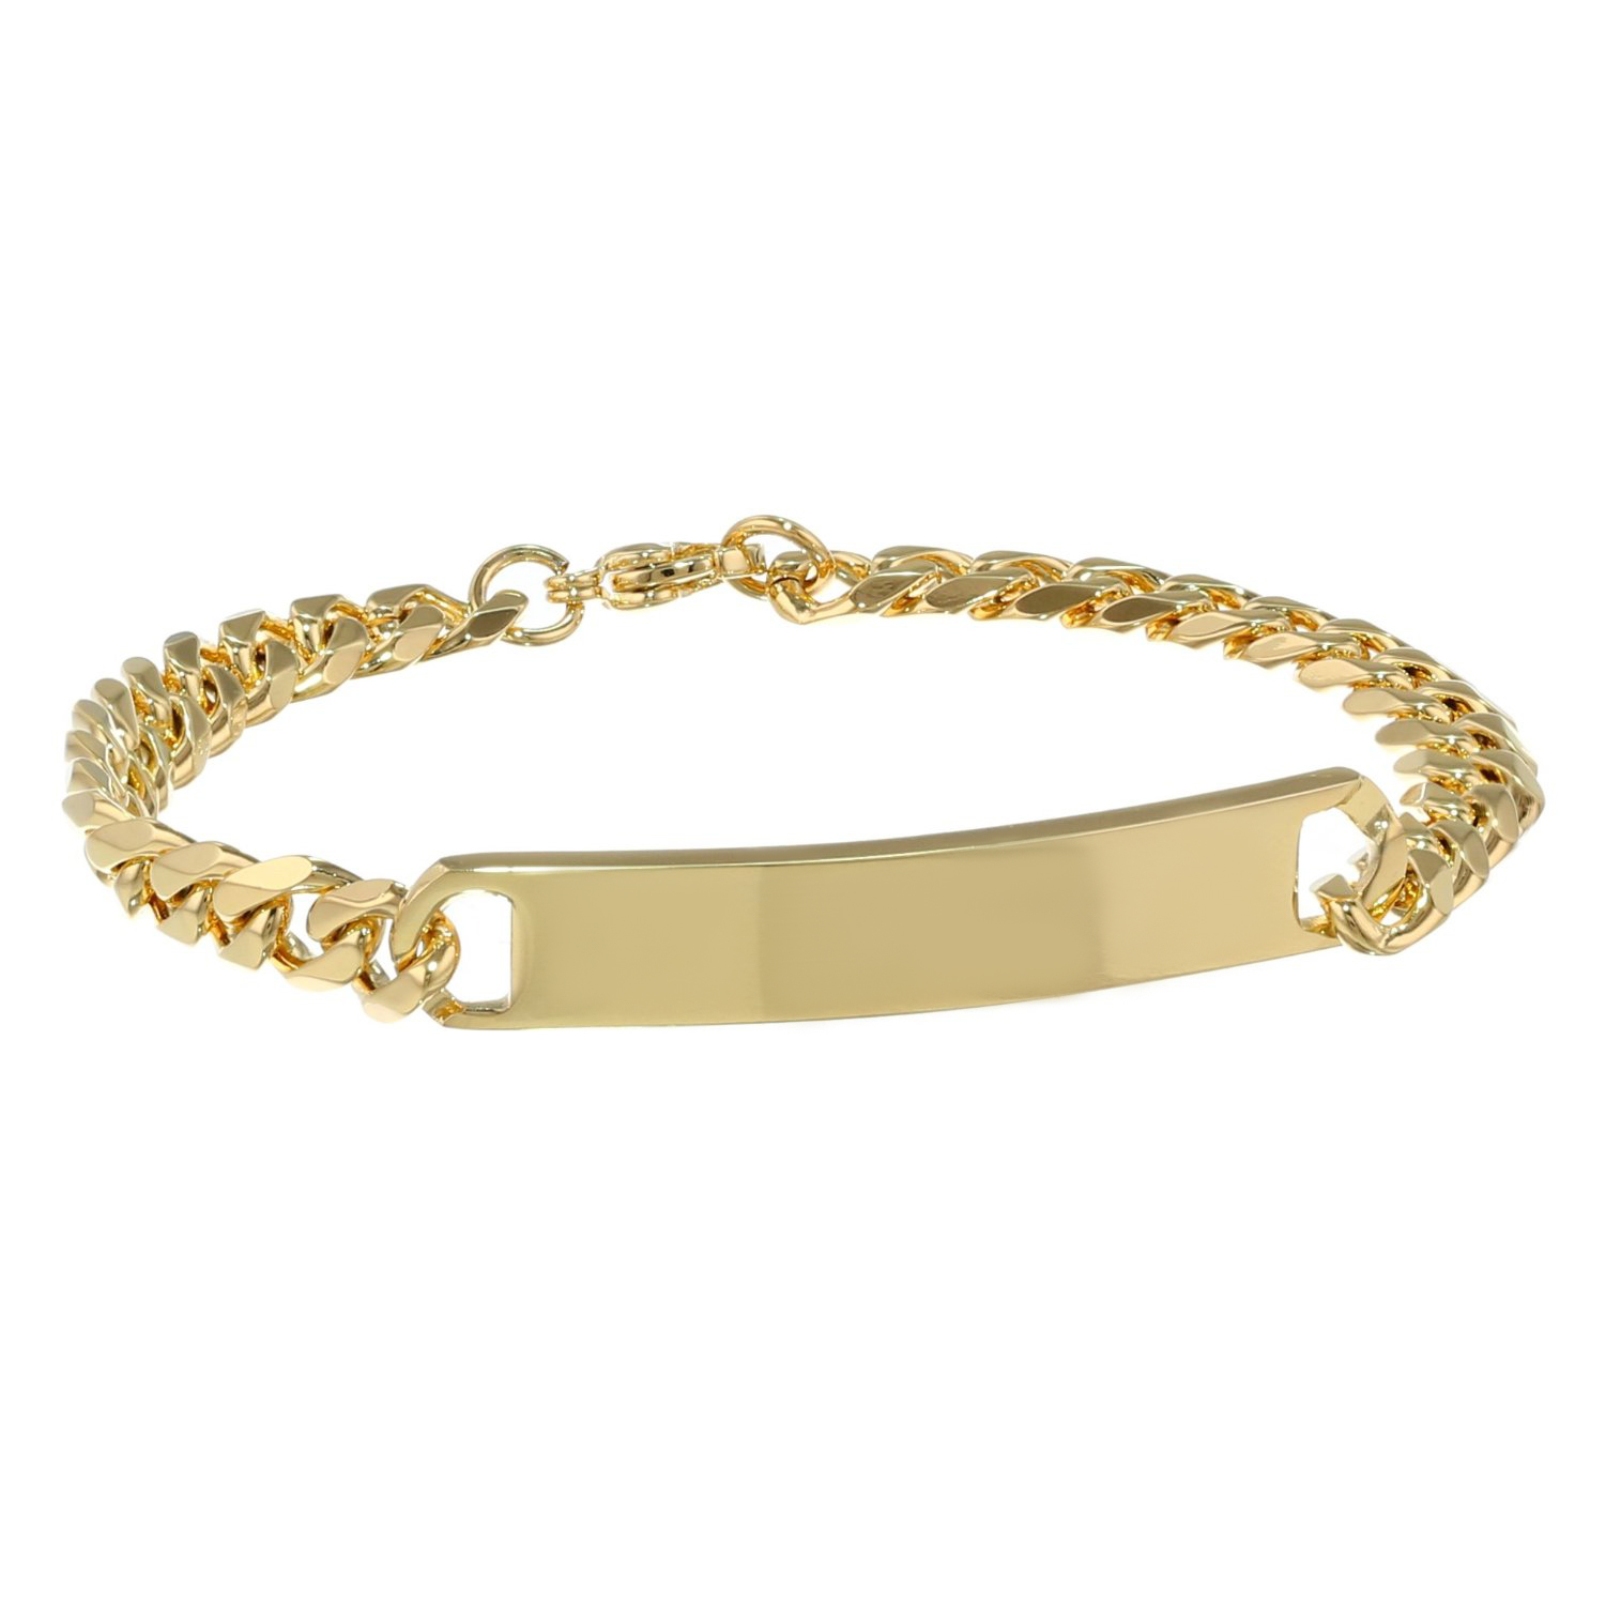 Curb Identification Bracelet in Gold Ion Plated Stainless Steel - 8mm